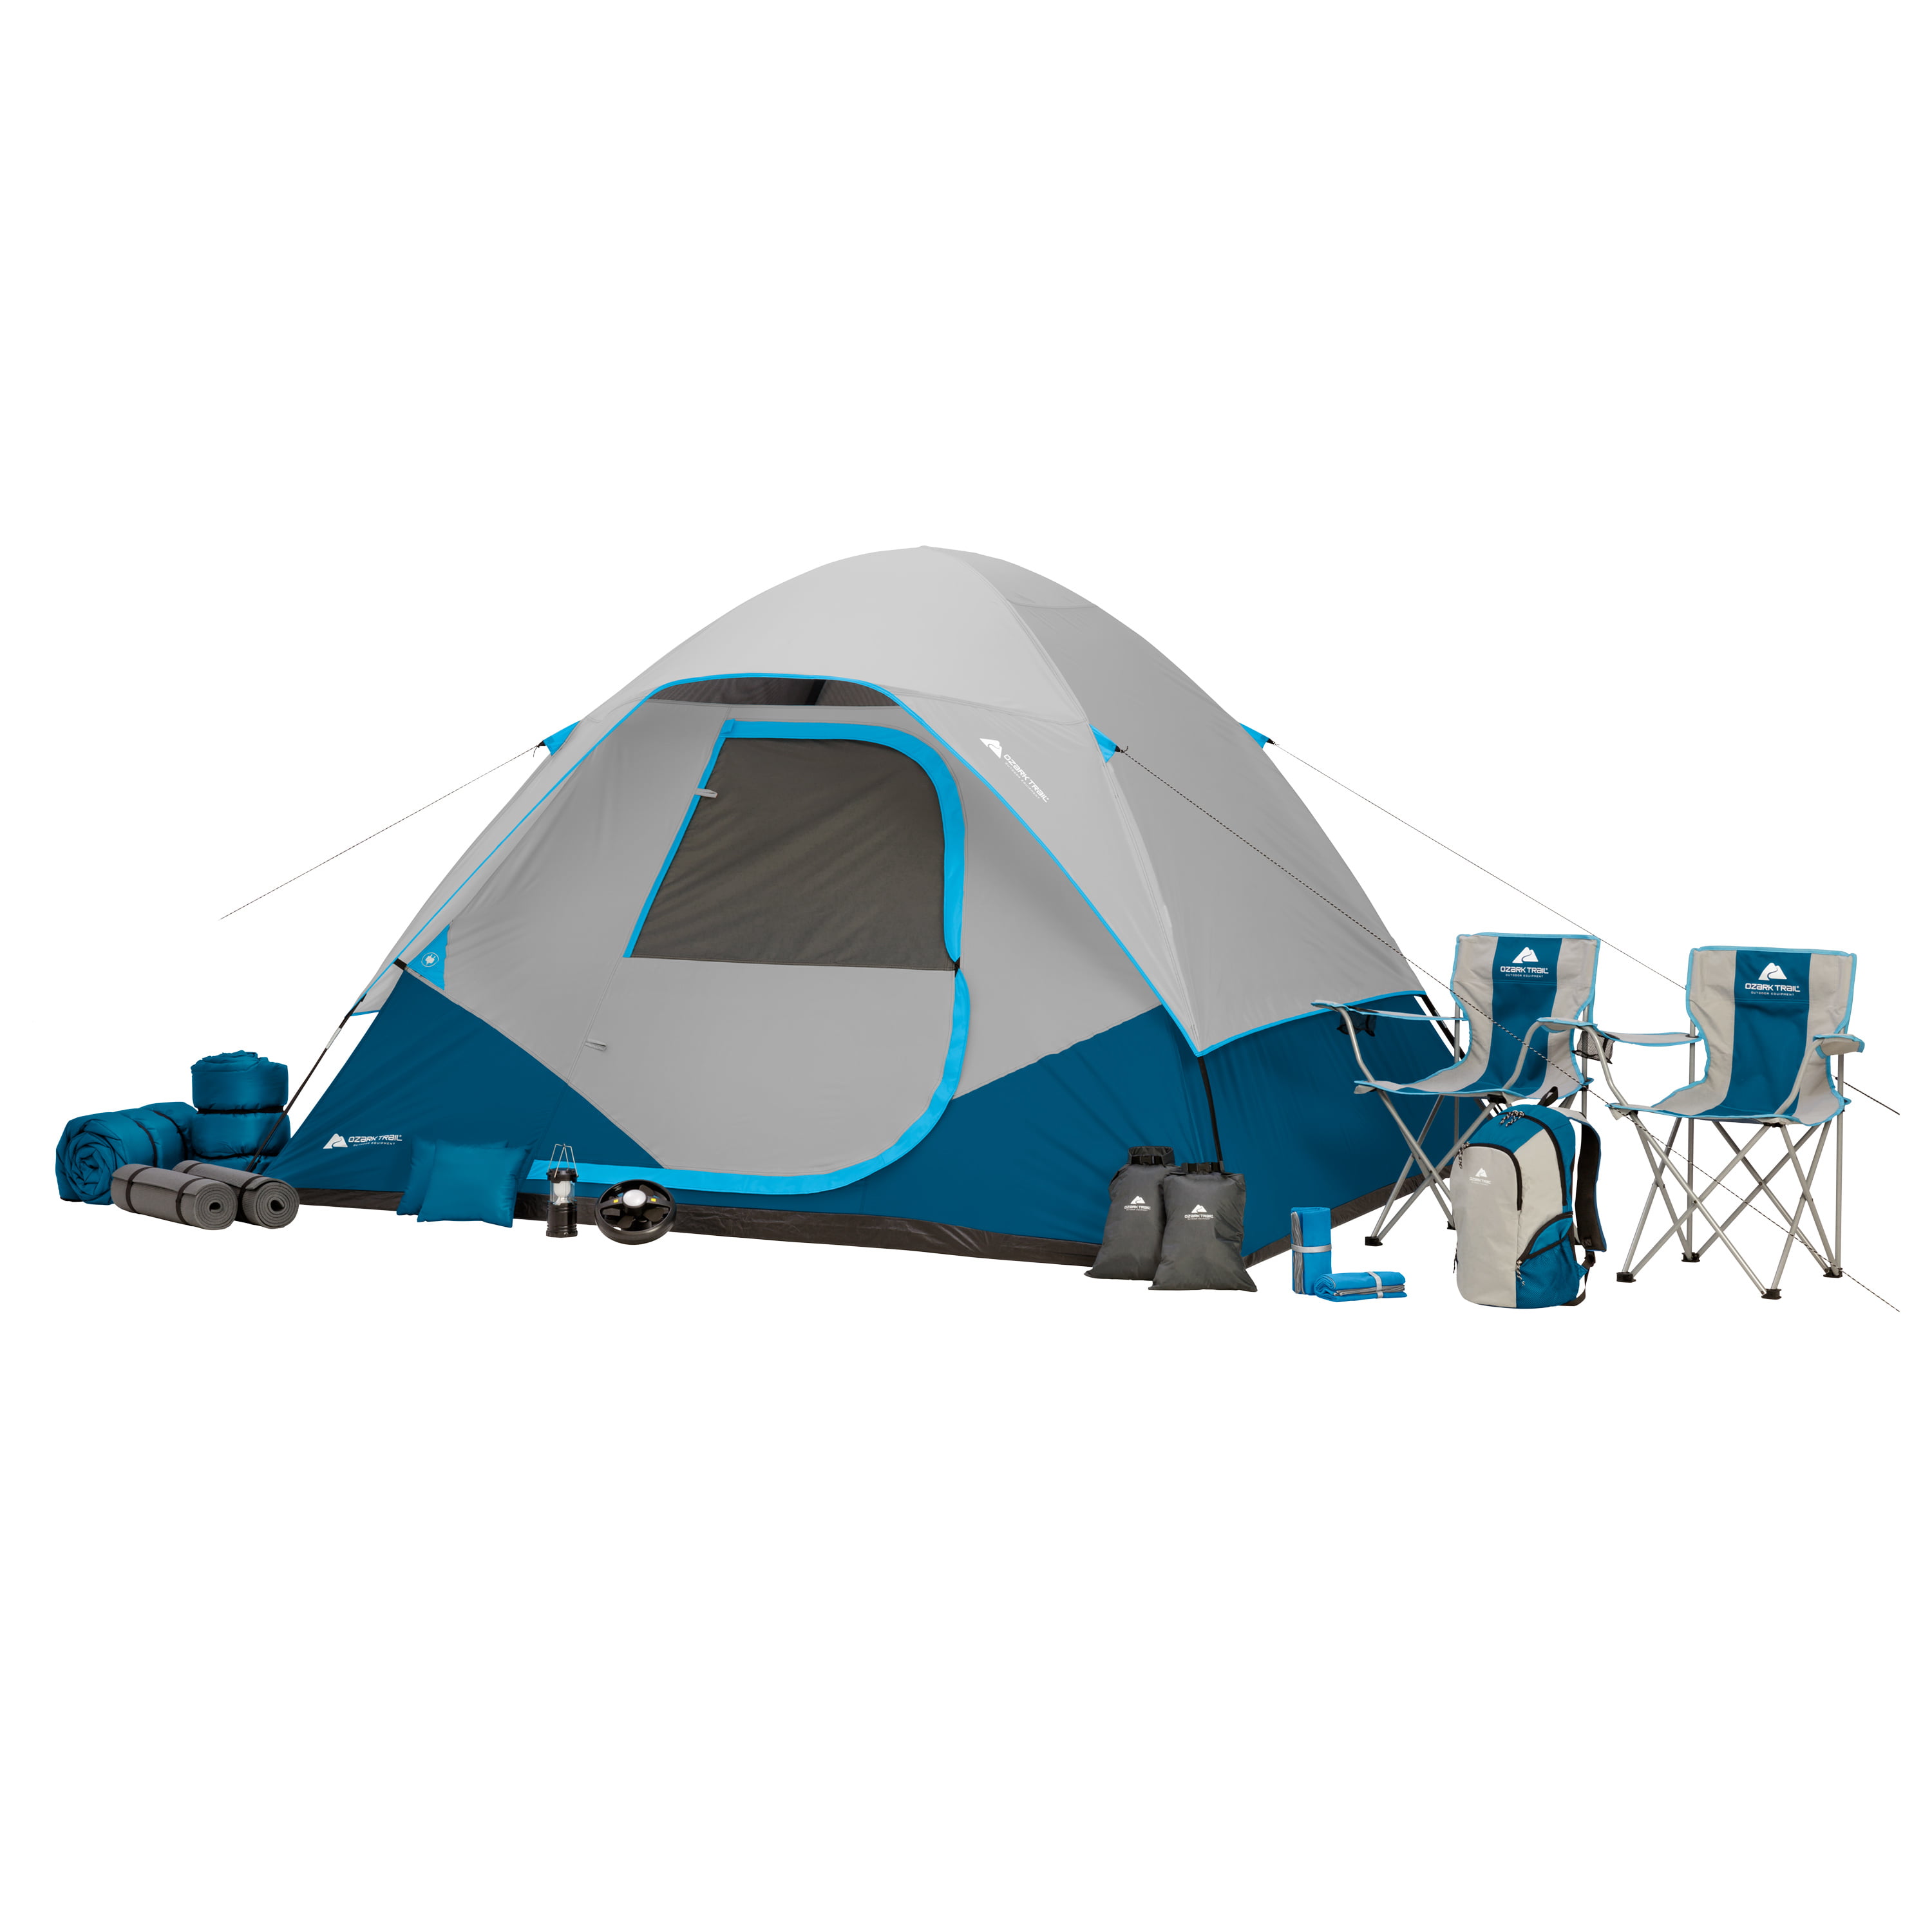 28-Piece Ozark Trail Premium Camping Tent Combo Package $125 + Free Shipping